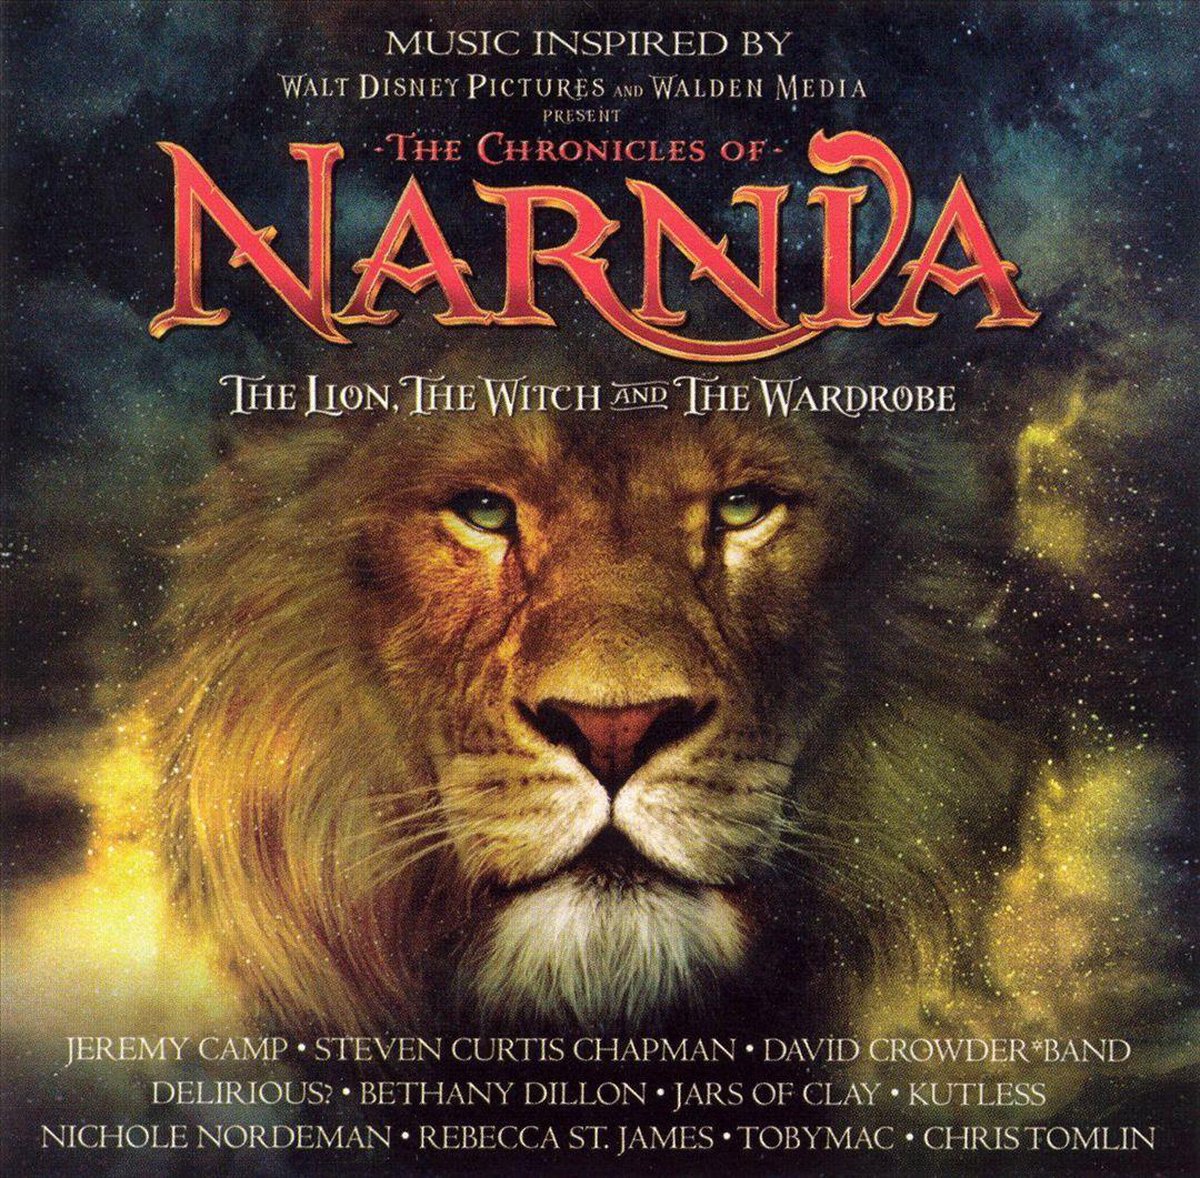 The Lion The Witch and The Wardrobe - Music Inspired by the Chronicles of Narnia - Original Soundtrack